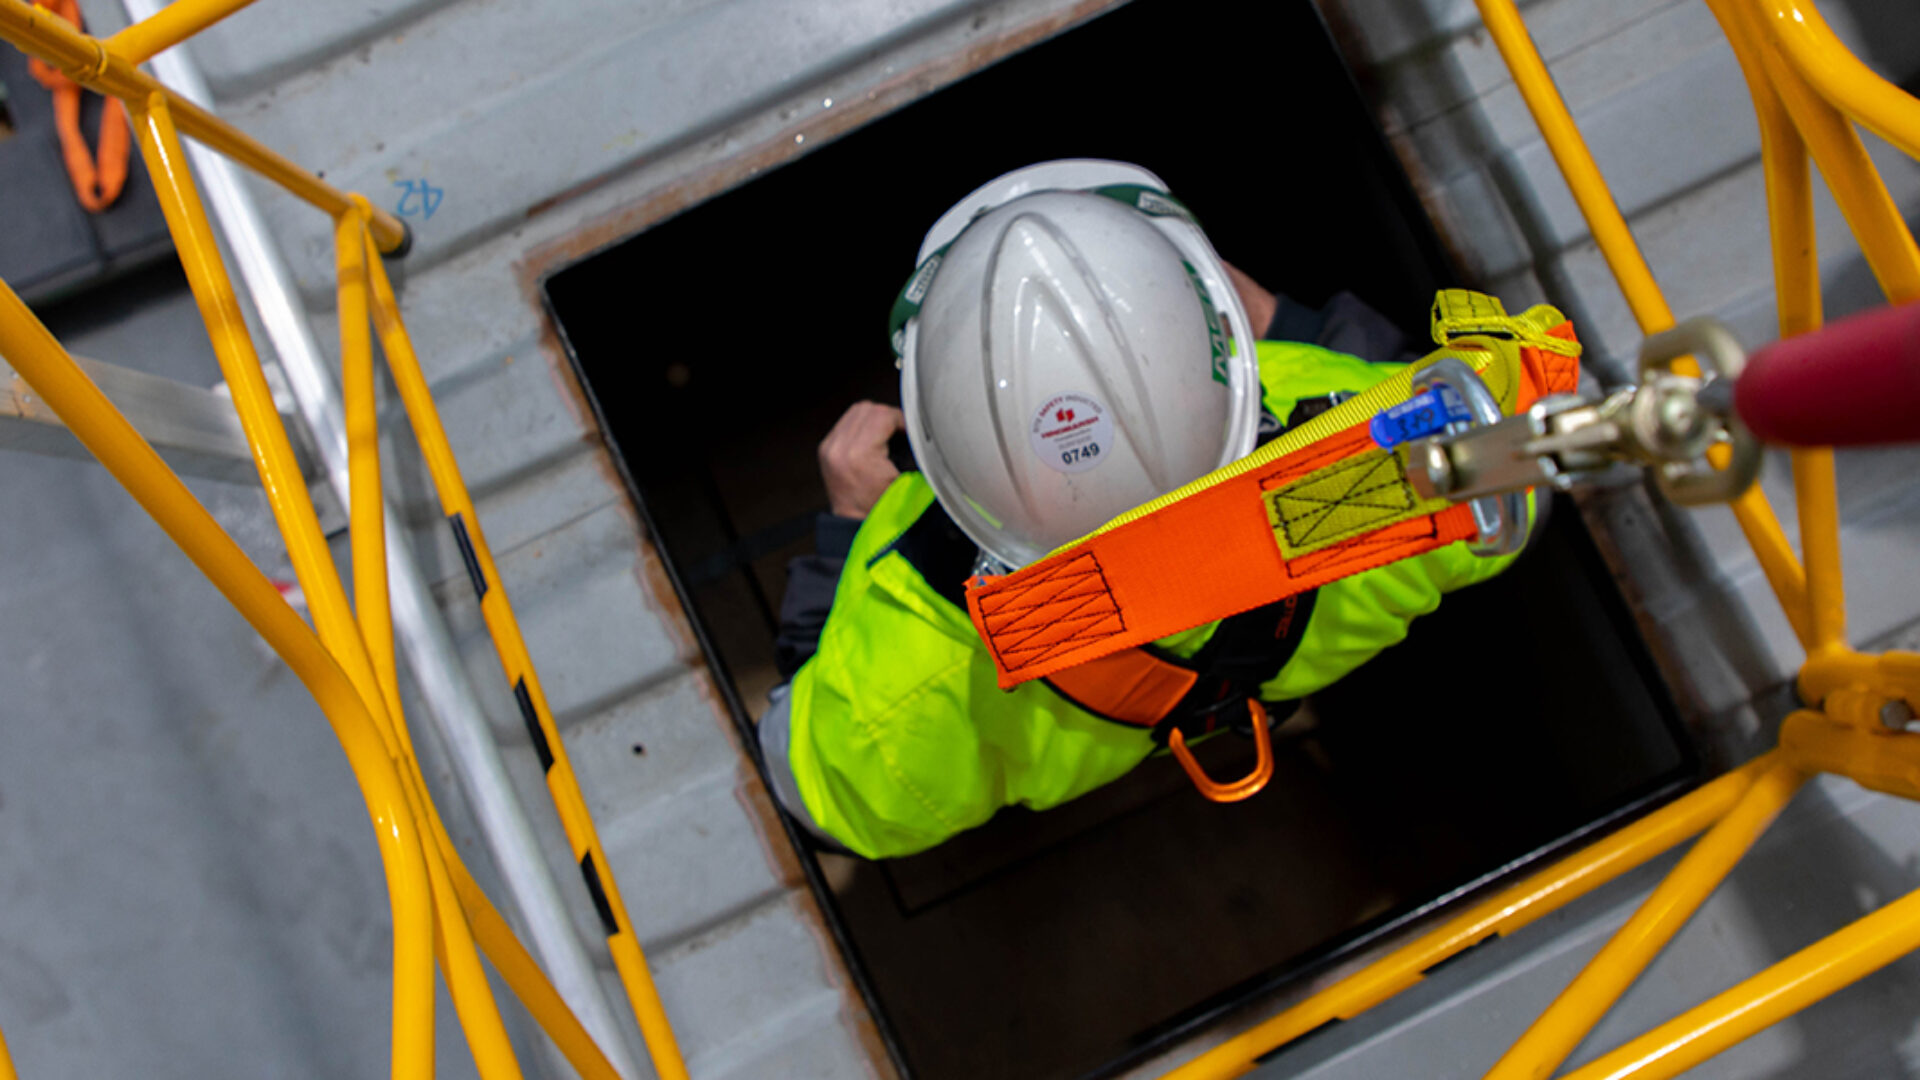 Worker being lowered through an entry manhole into a confined space